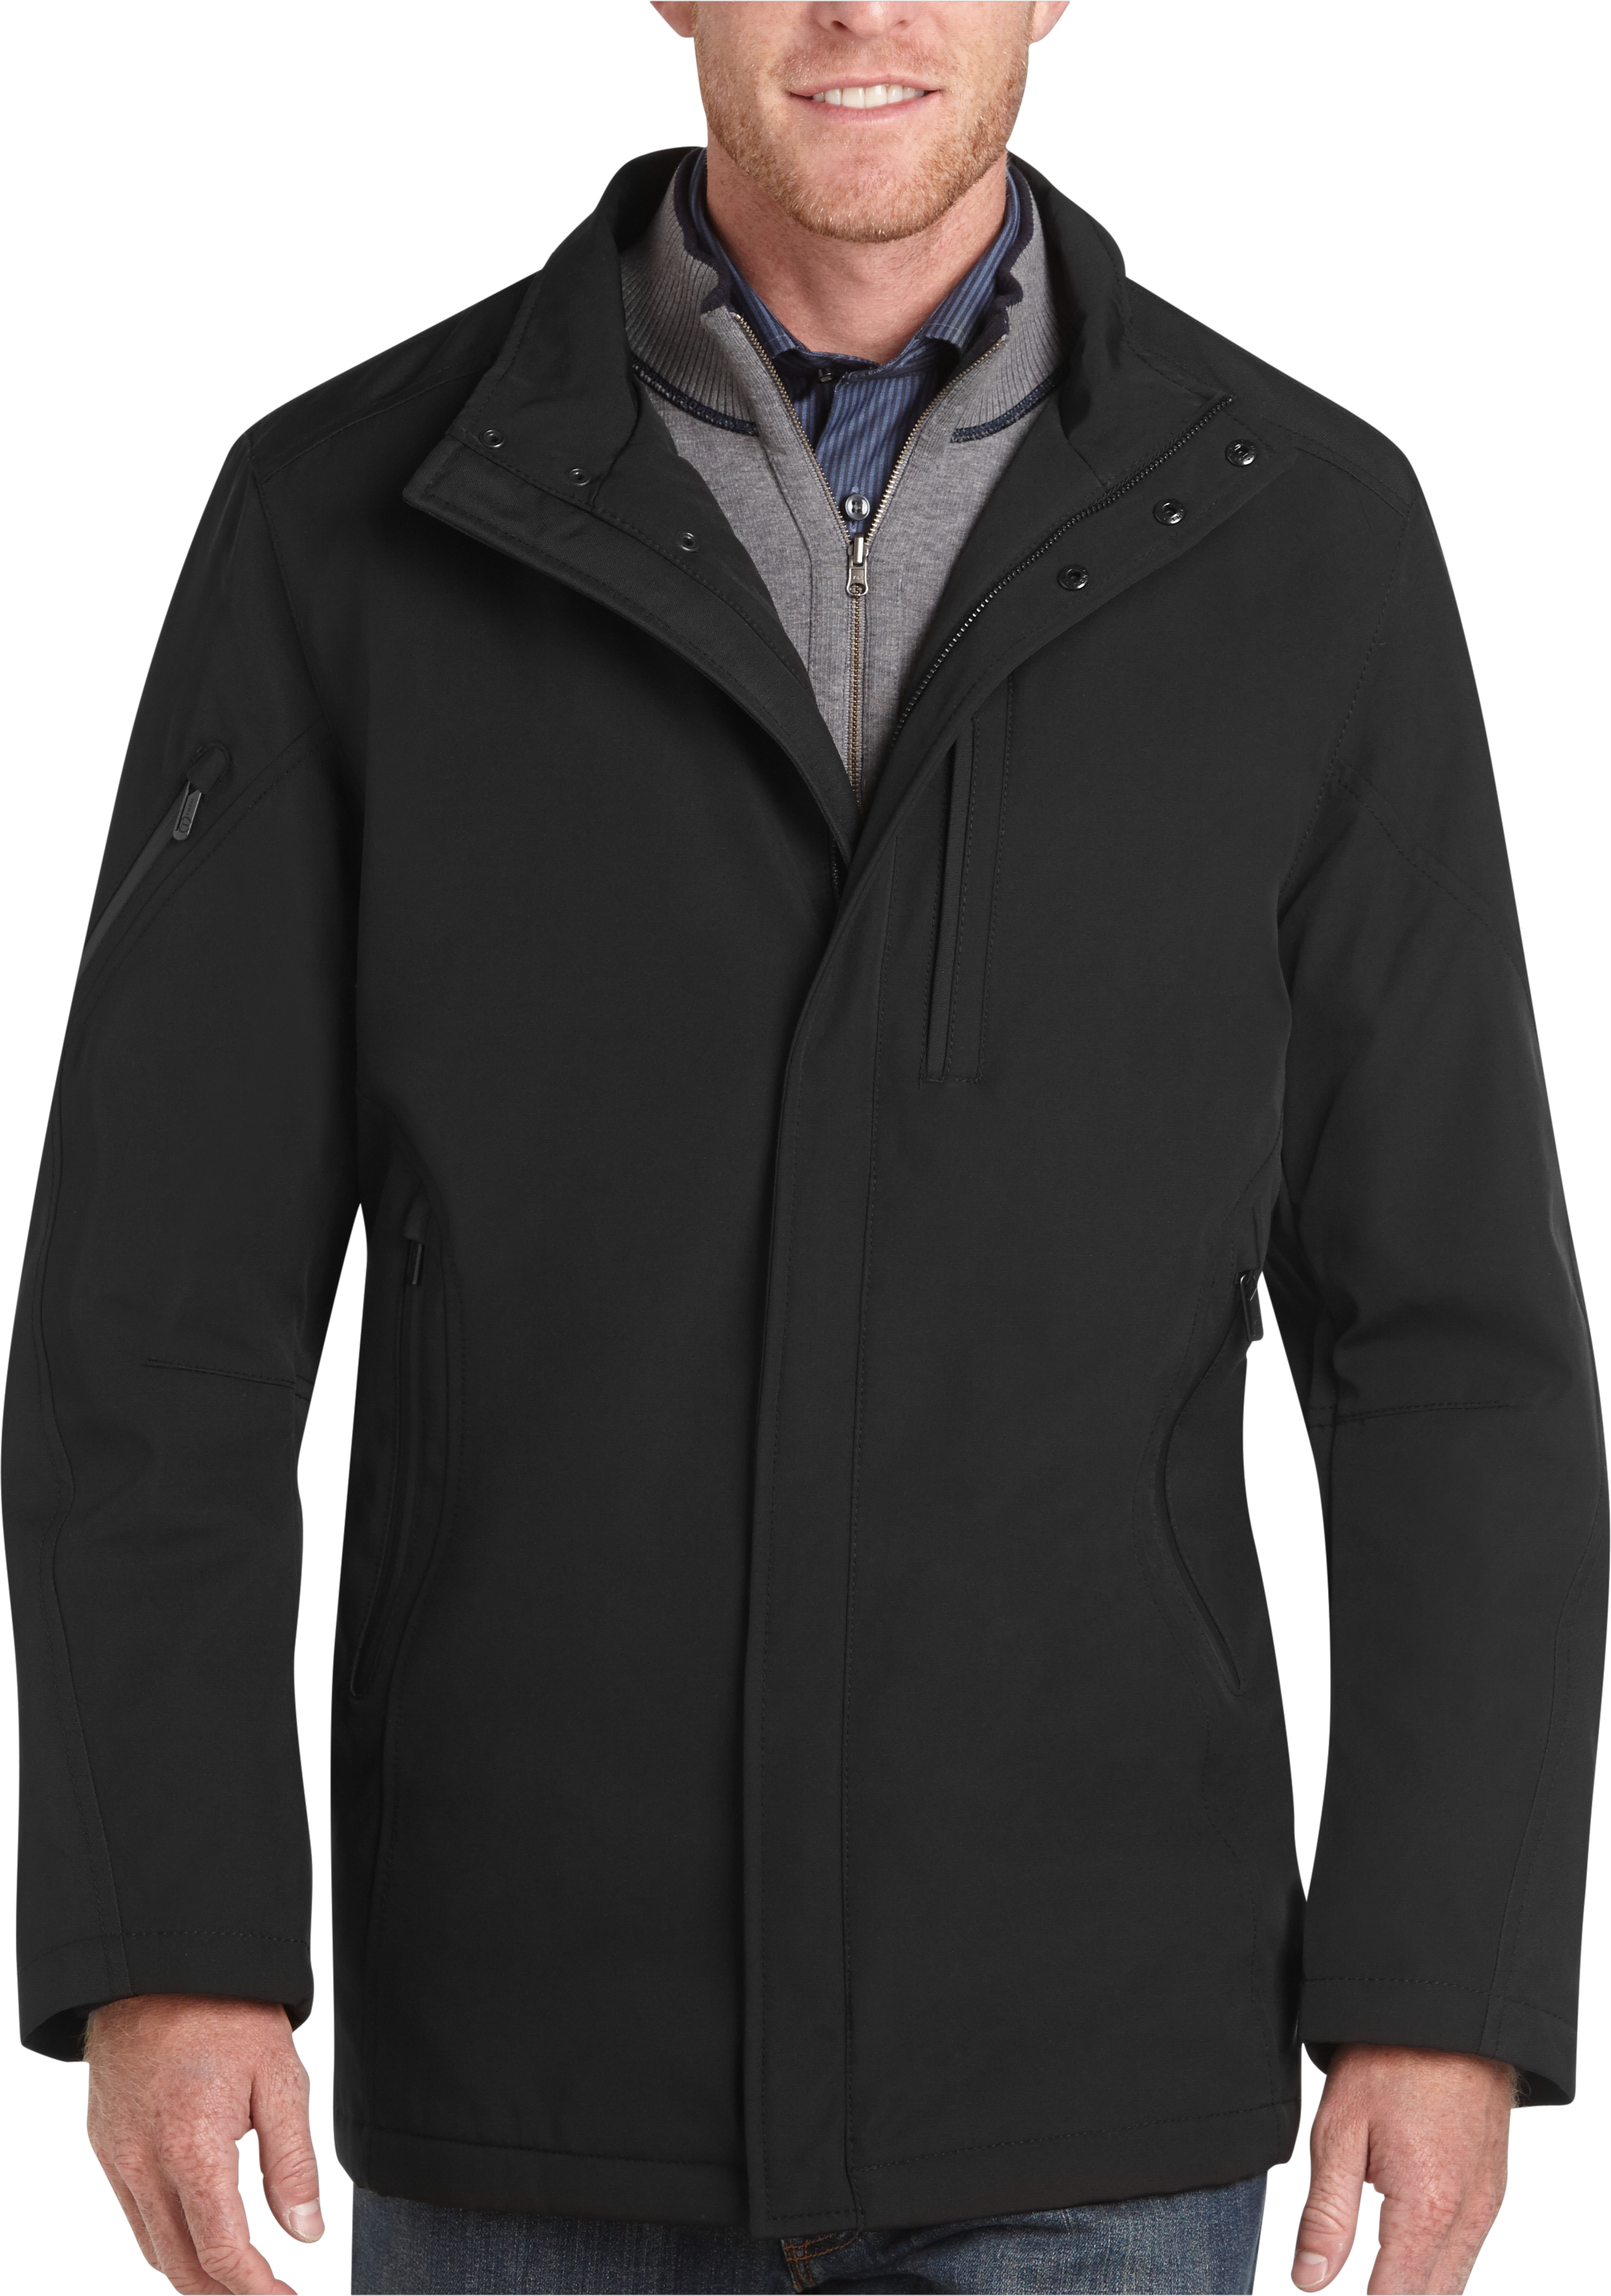 T-Tech by Tumi Black Water Repellant Classic Fit Jacket